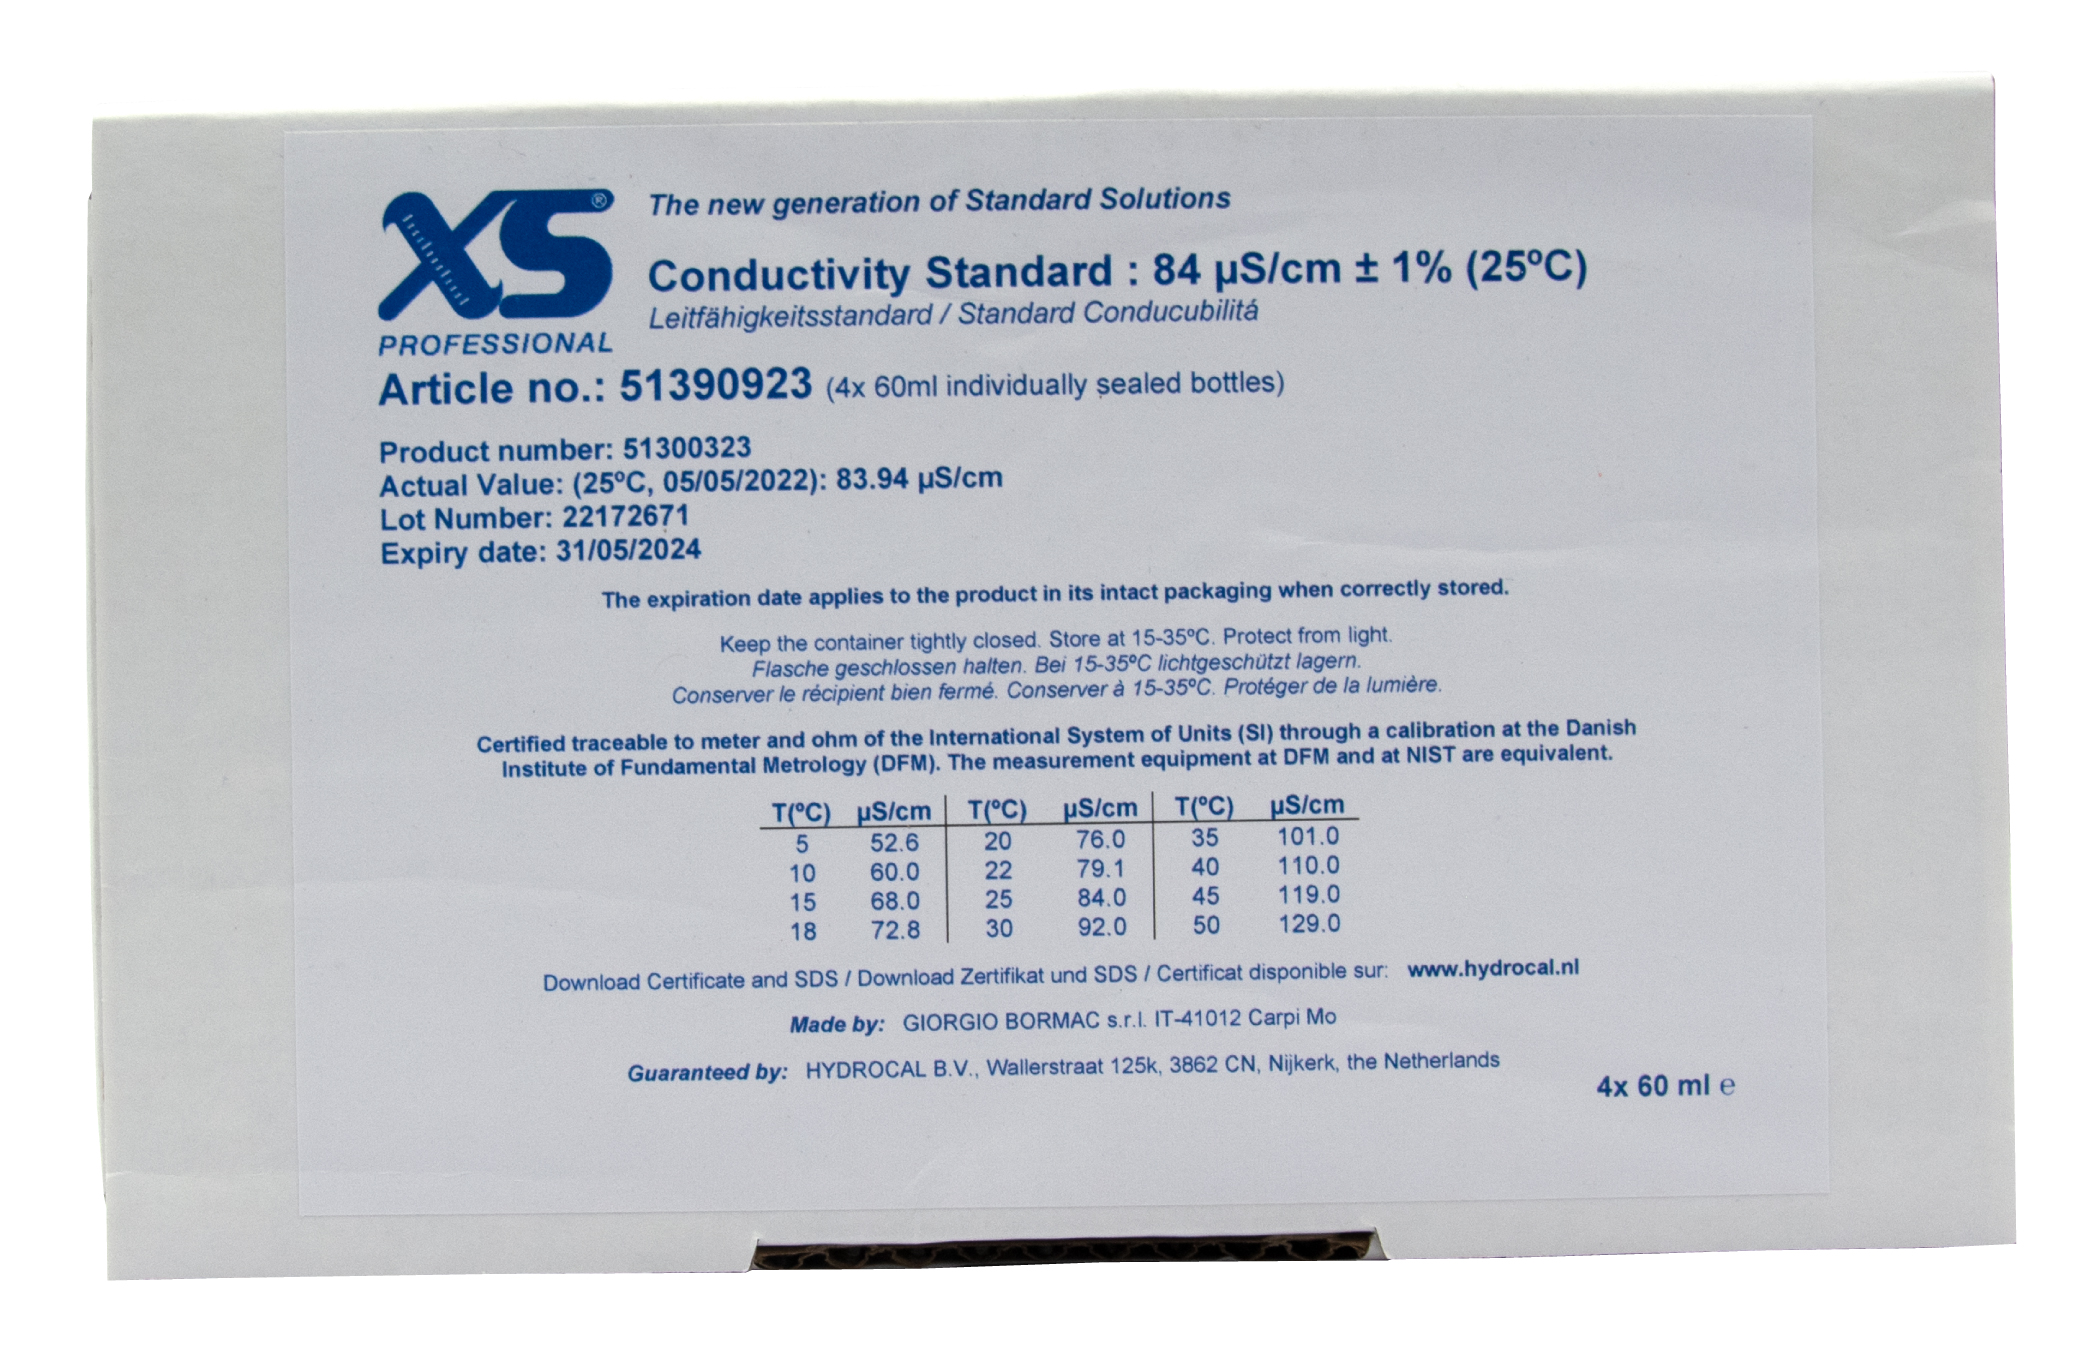 XS Professional 84µS/cm - 4x 60ml conductivity calibration solution package with DFM certificate